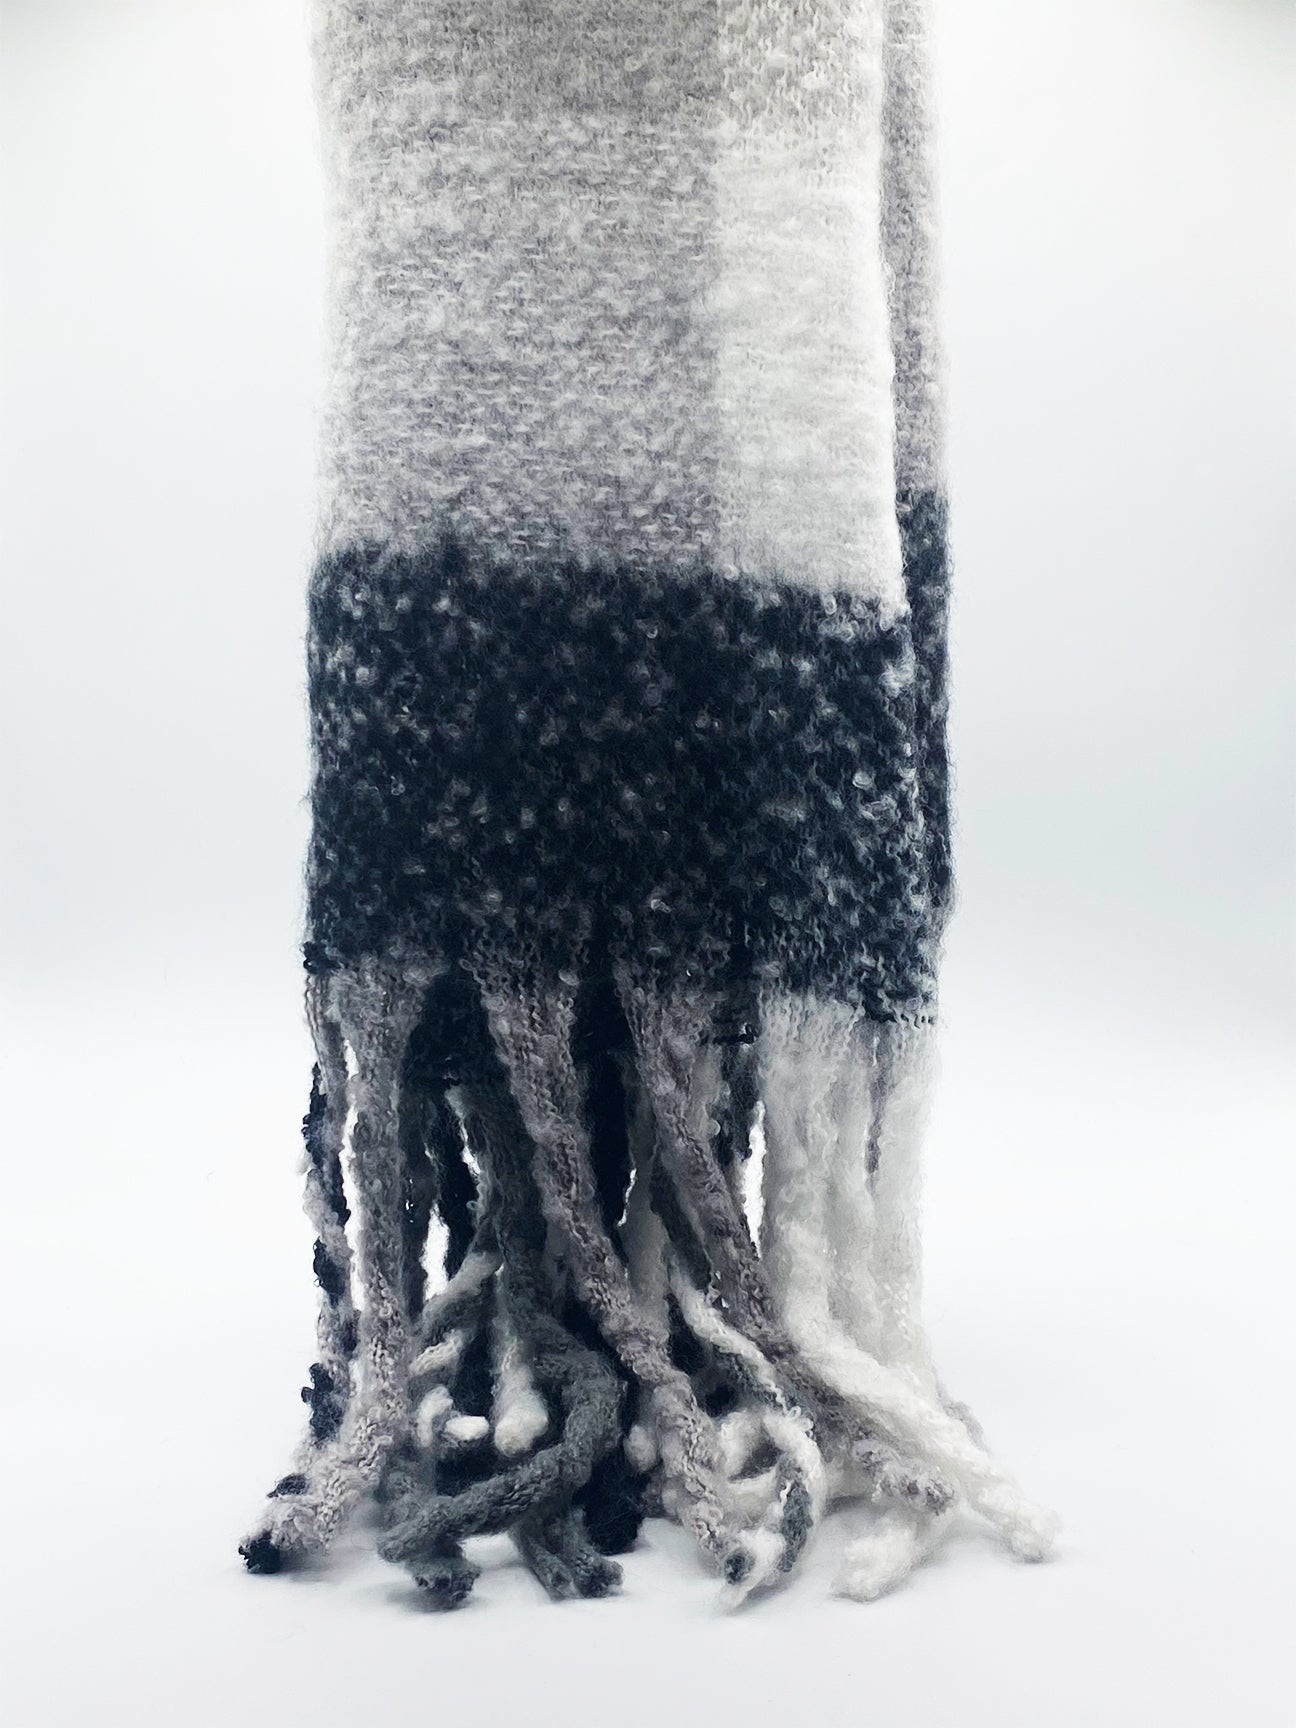 Check Blanket Scarf in Black and White